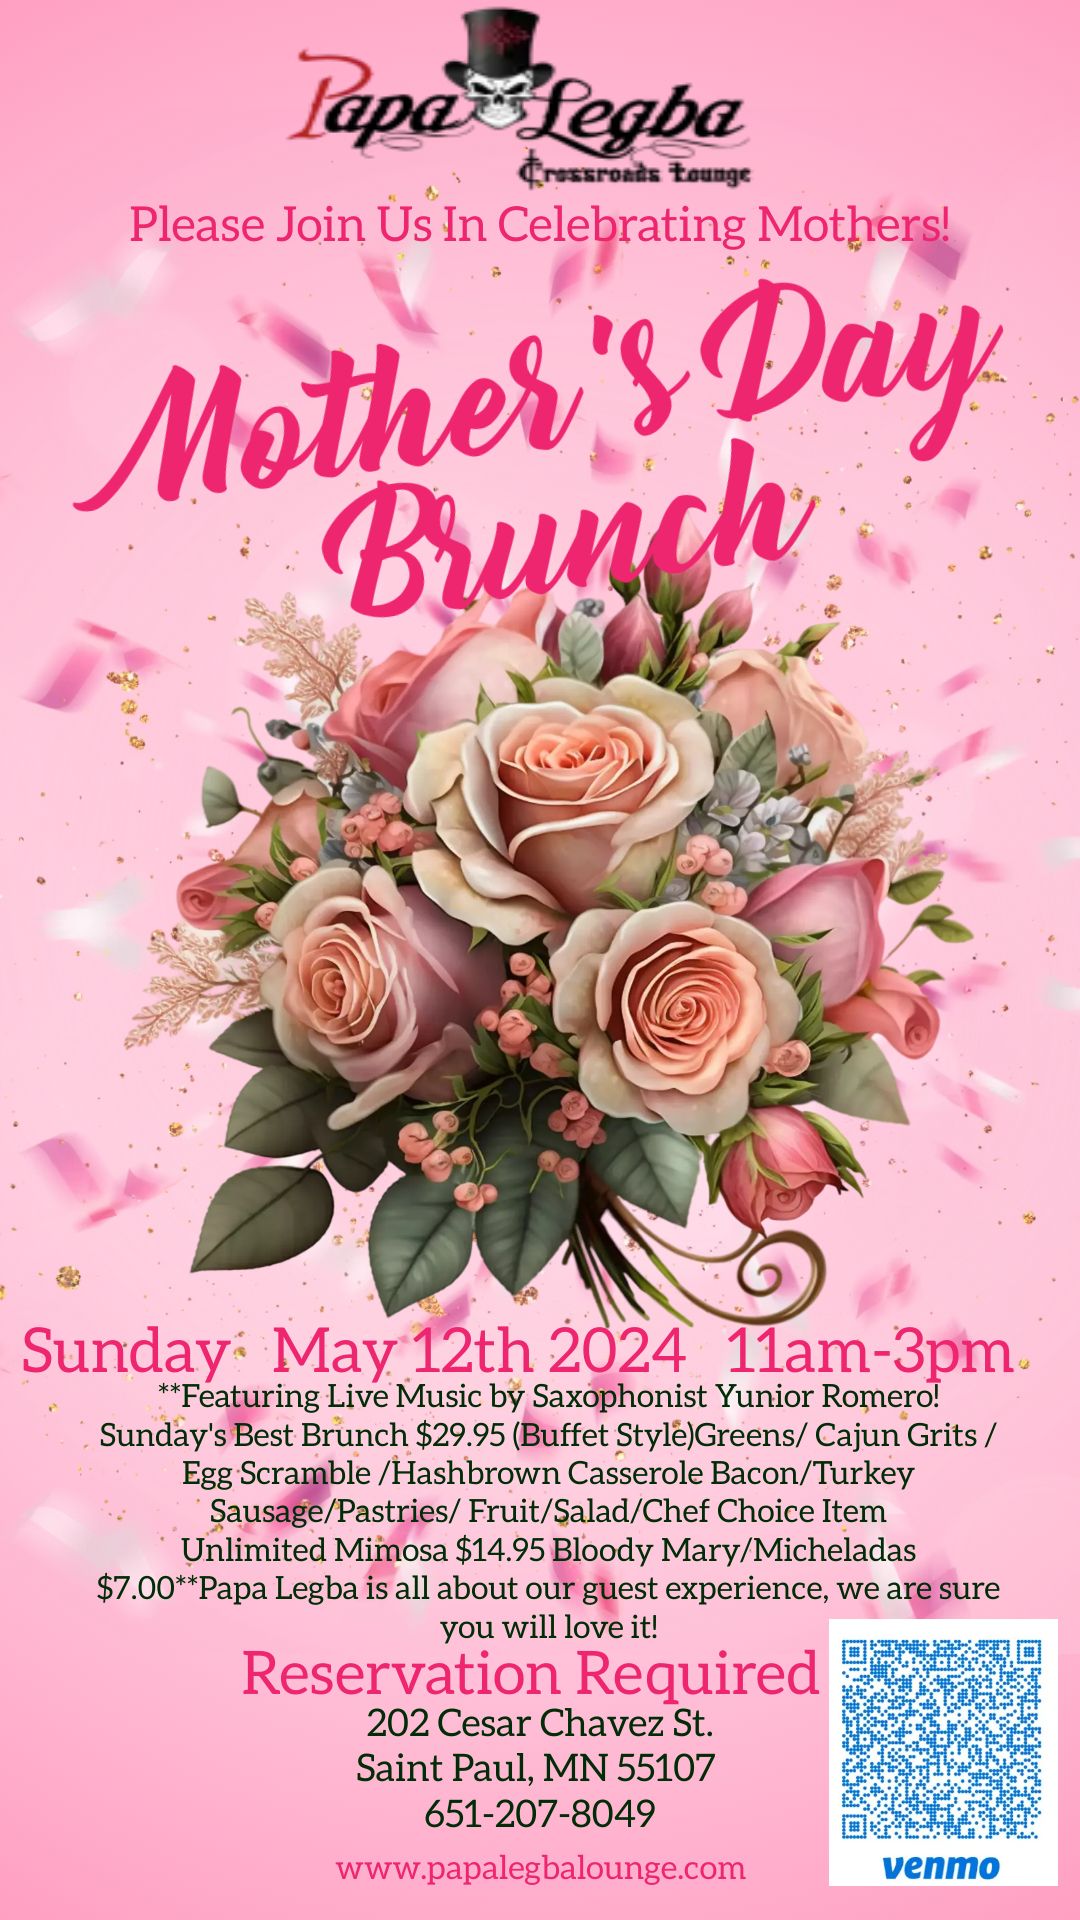 Mother's Day Brunch at Papa Legba's!